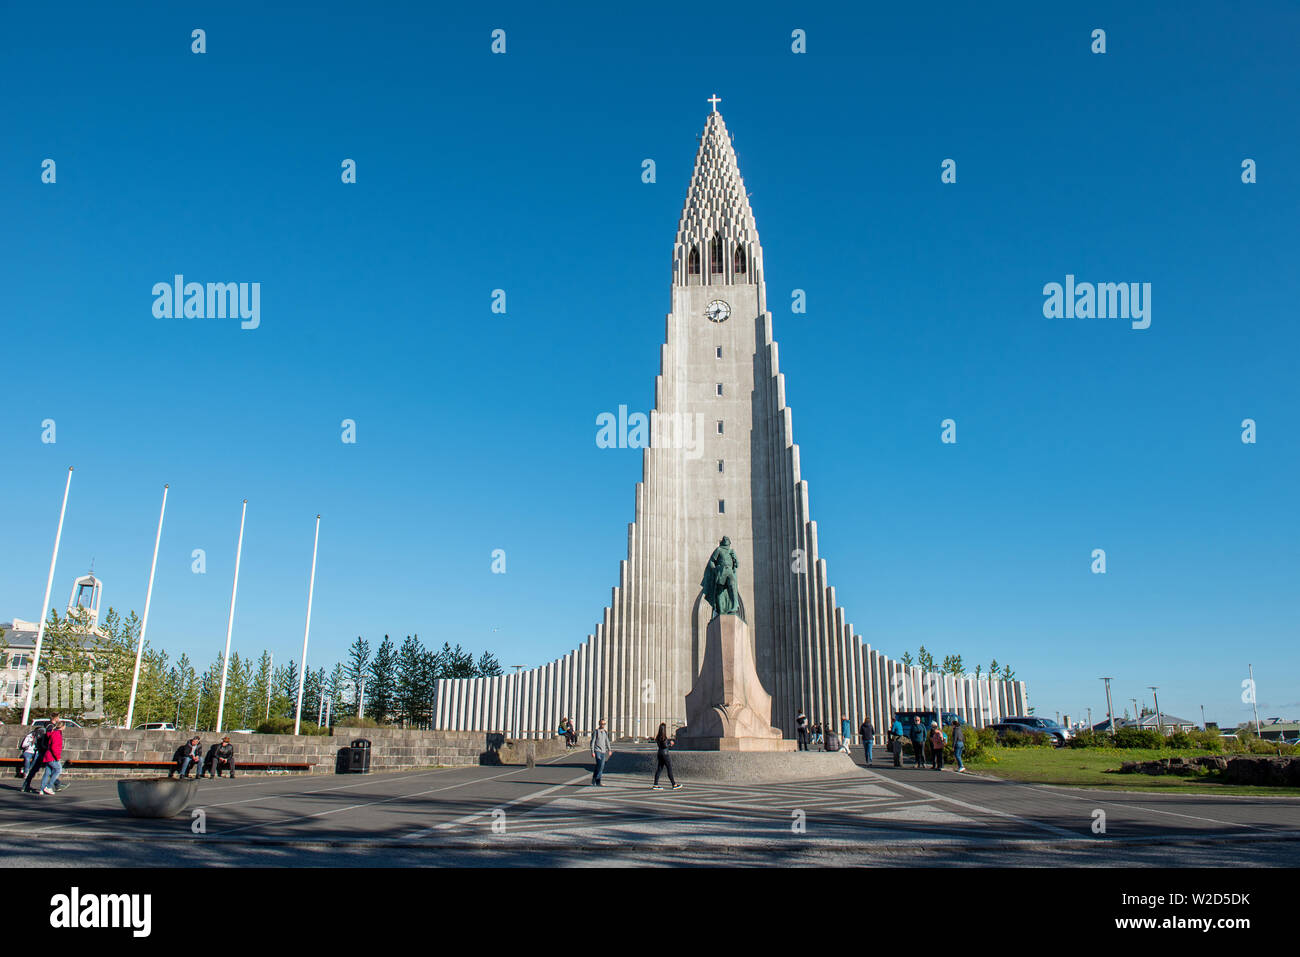 REYKJAVIK, ICELAND - MAY 24, 2019: Tourists visiting the Hallgrimskirkja Lutheran parish church in Reykjavik and the statue of Leif Erikson, the son o Stock Photo